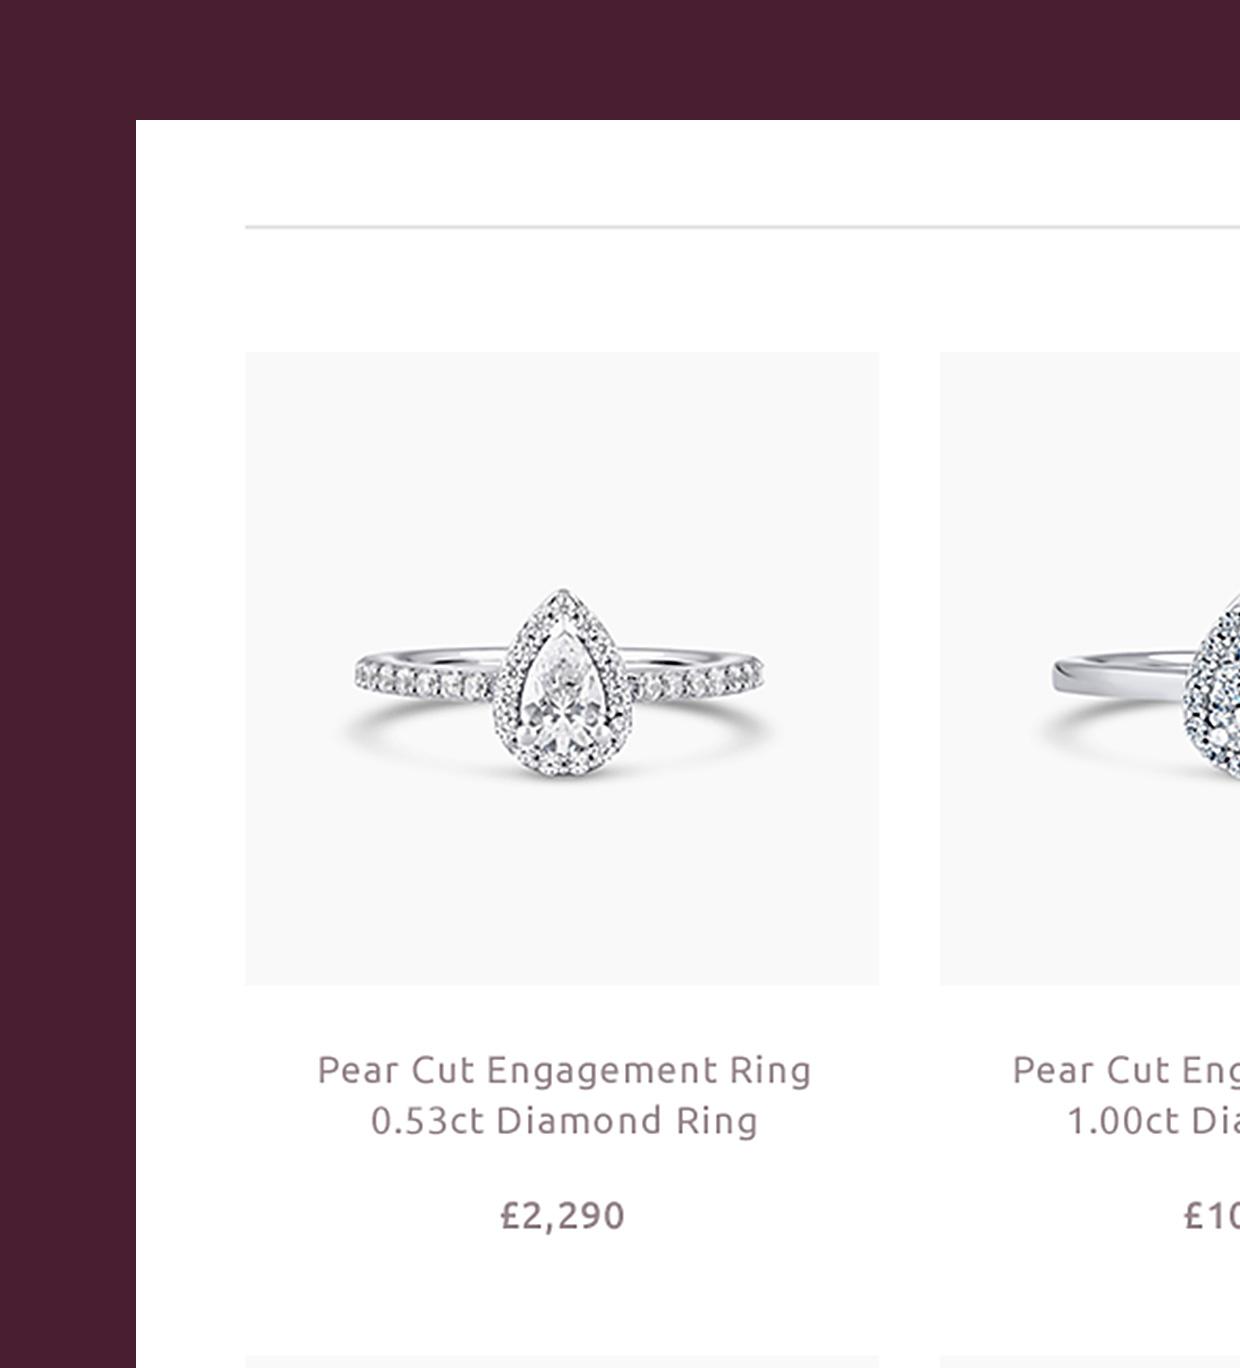 Product detail view of Jenny Jones Jewellery website - e-commerce design and enhanced UX